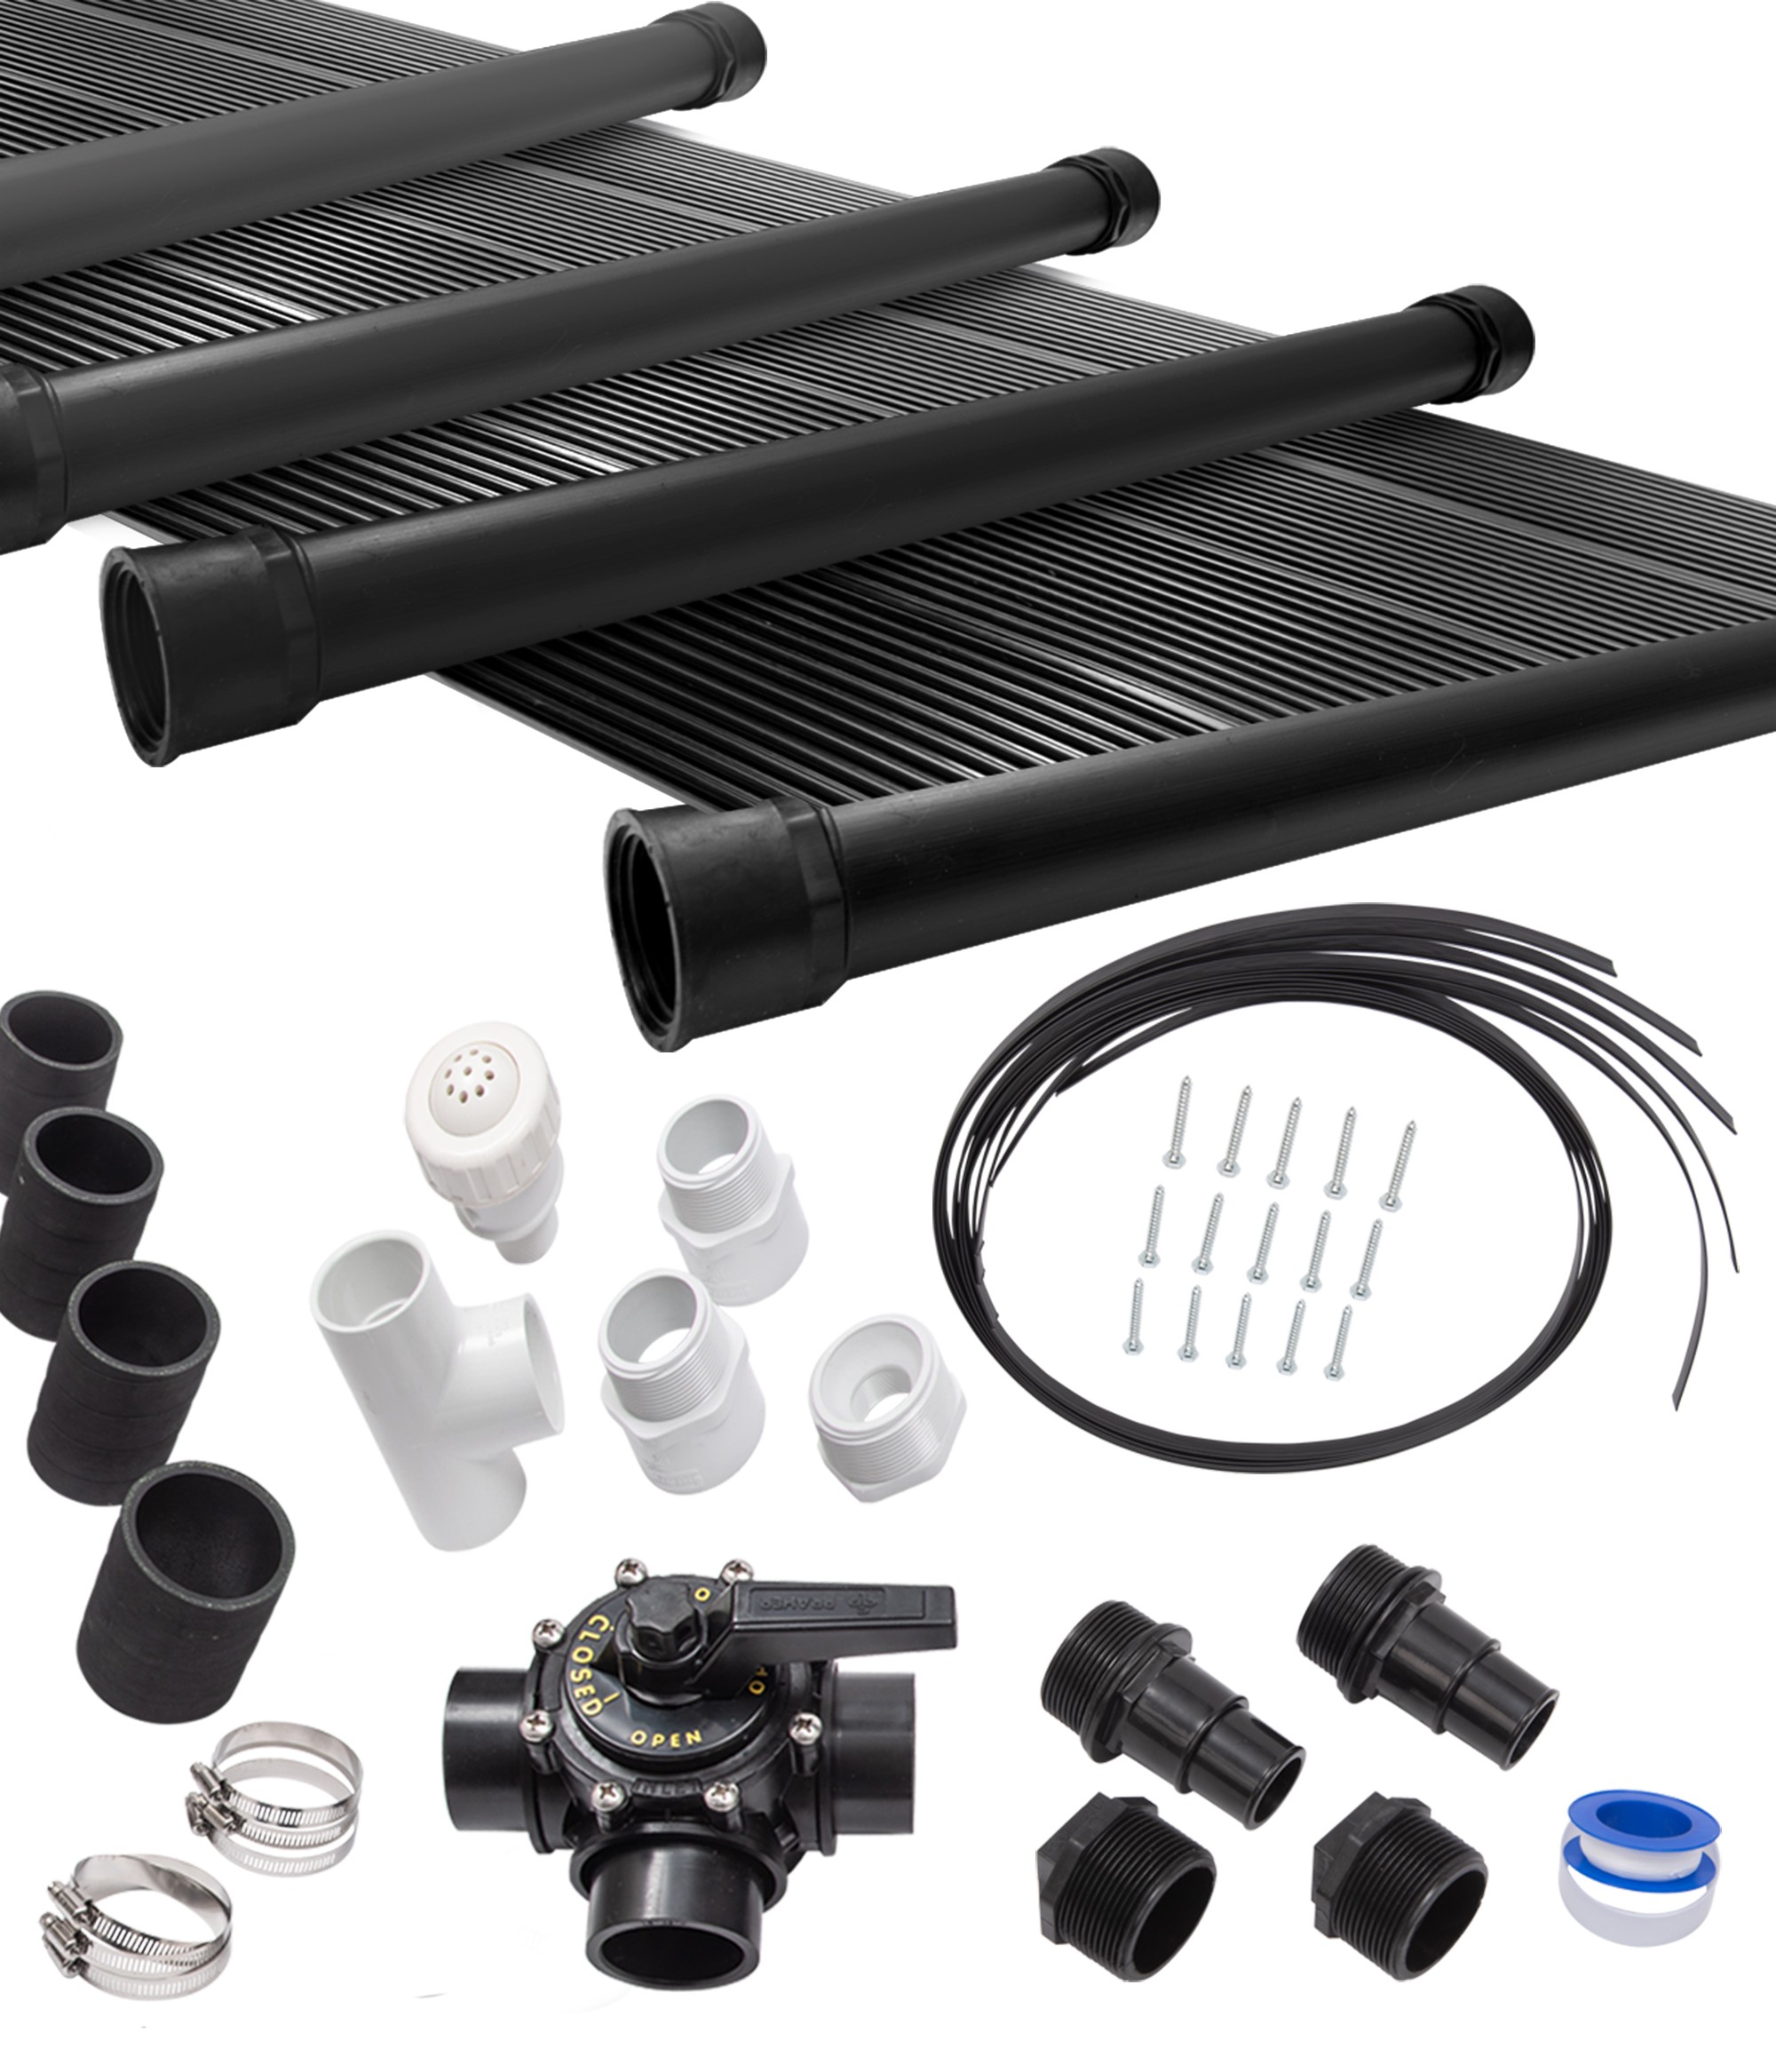 6-2X12' SunQuest Solar Swimming Pool Heater Complete System with Roof Kits